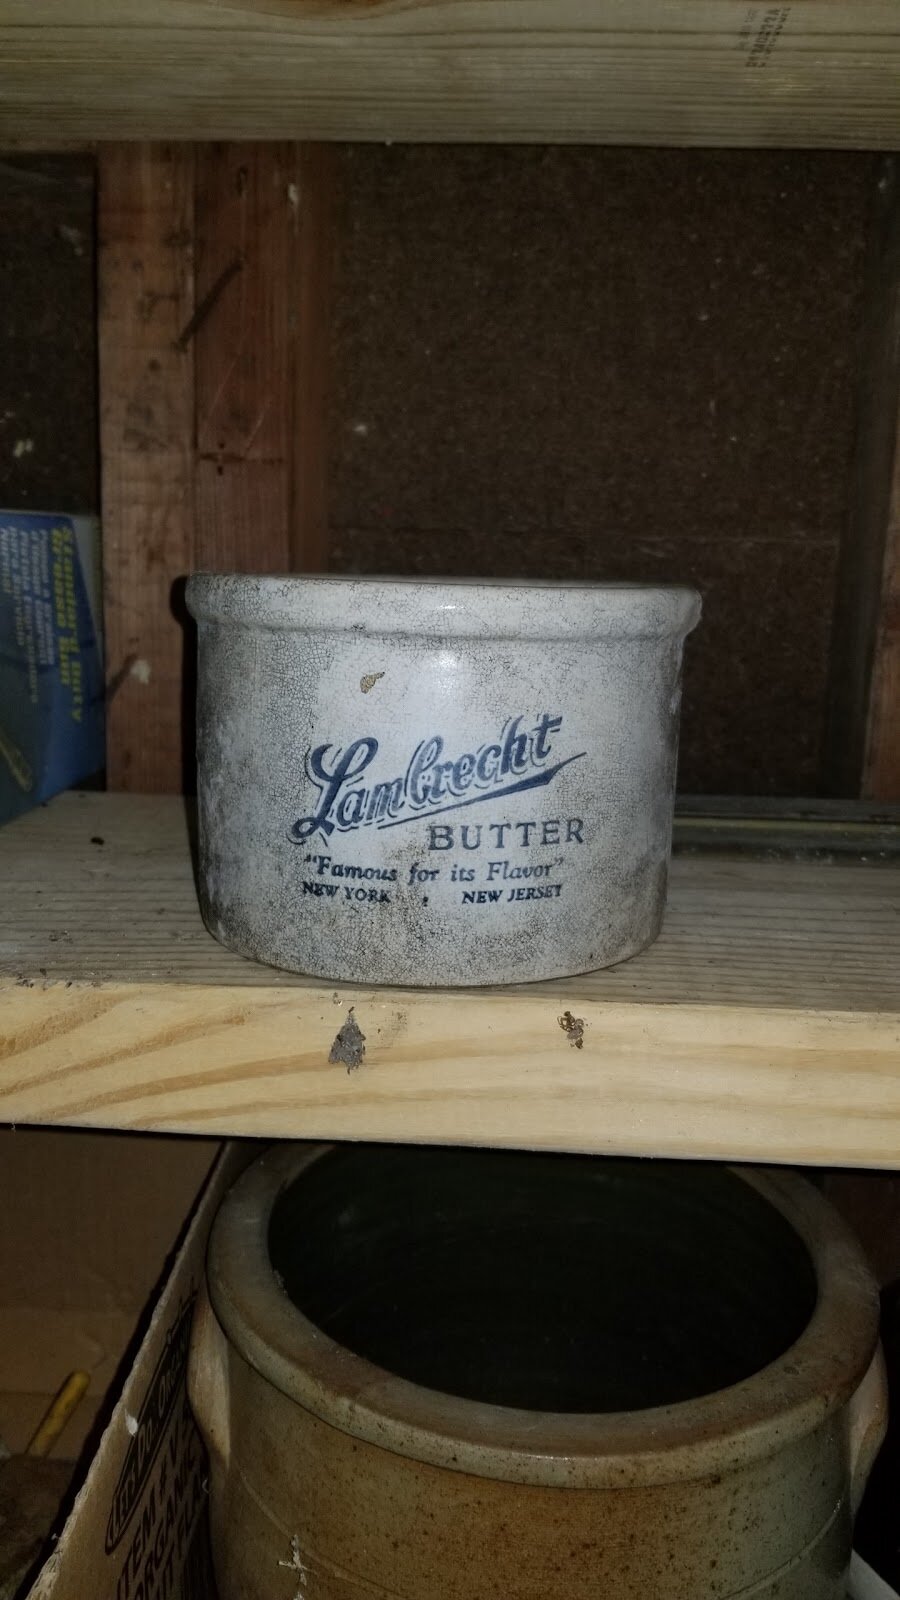 This crock is worth 100s. It was hanging around with the debris in the barn.